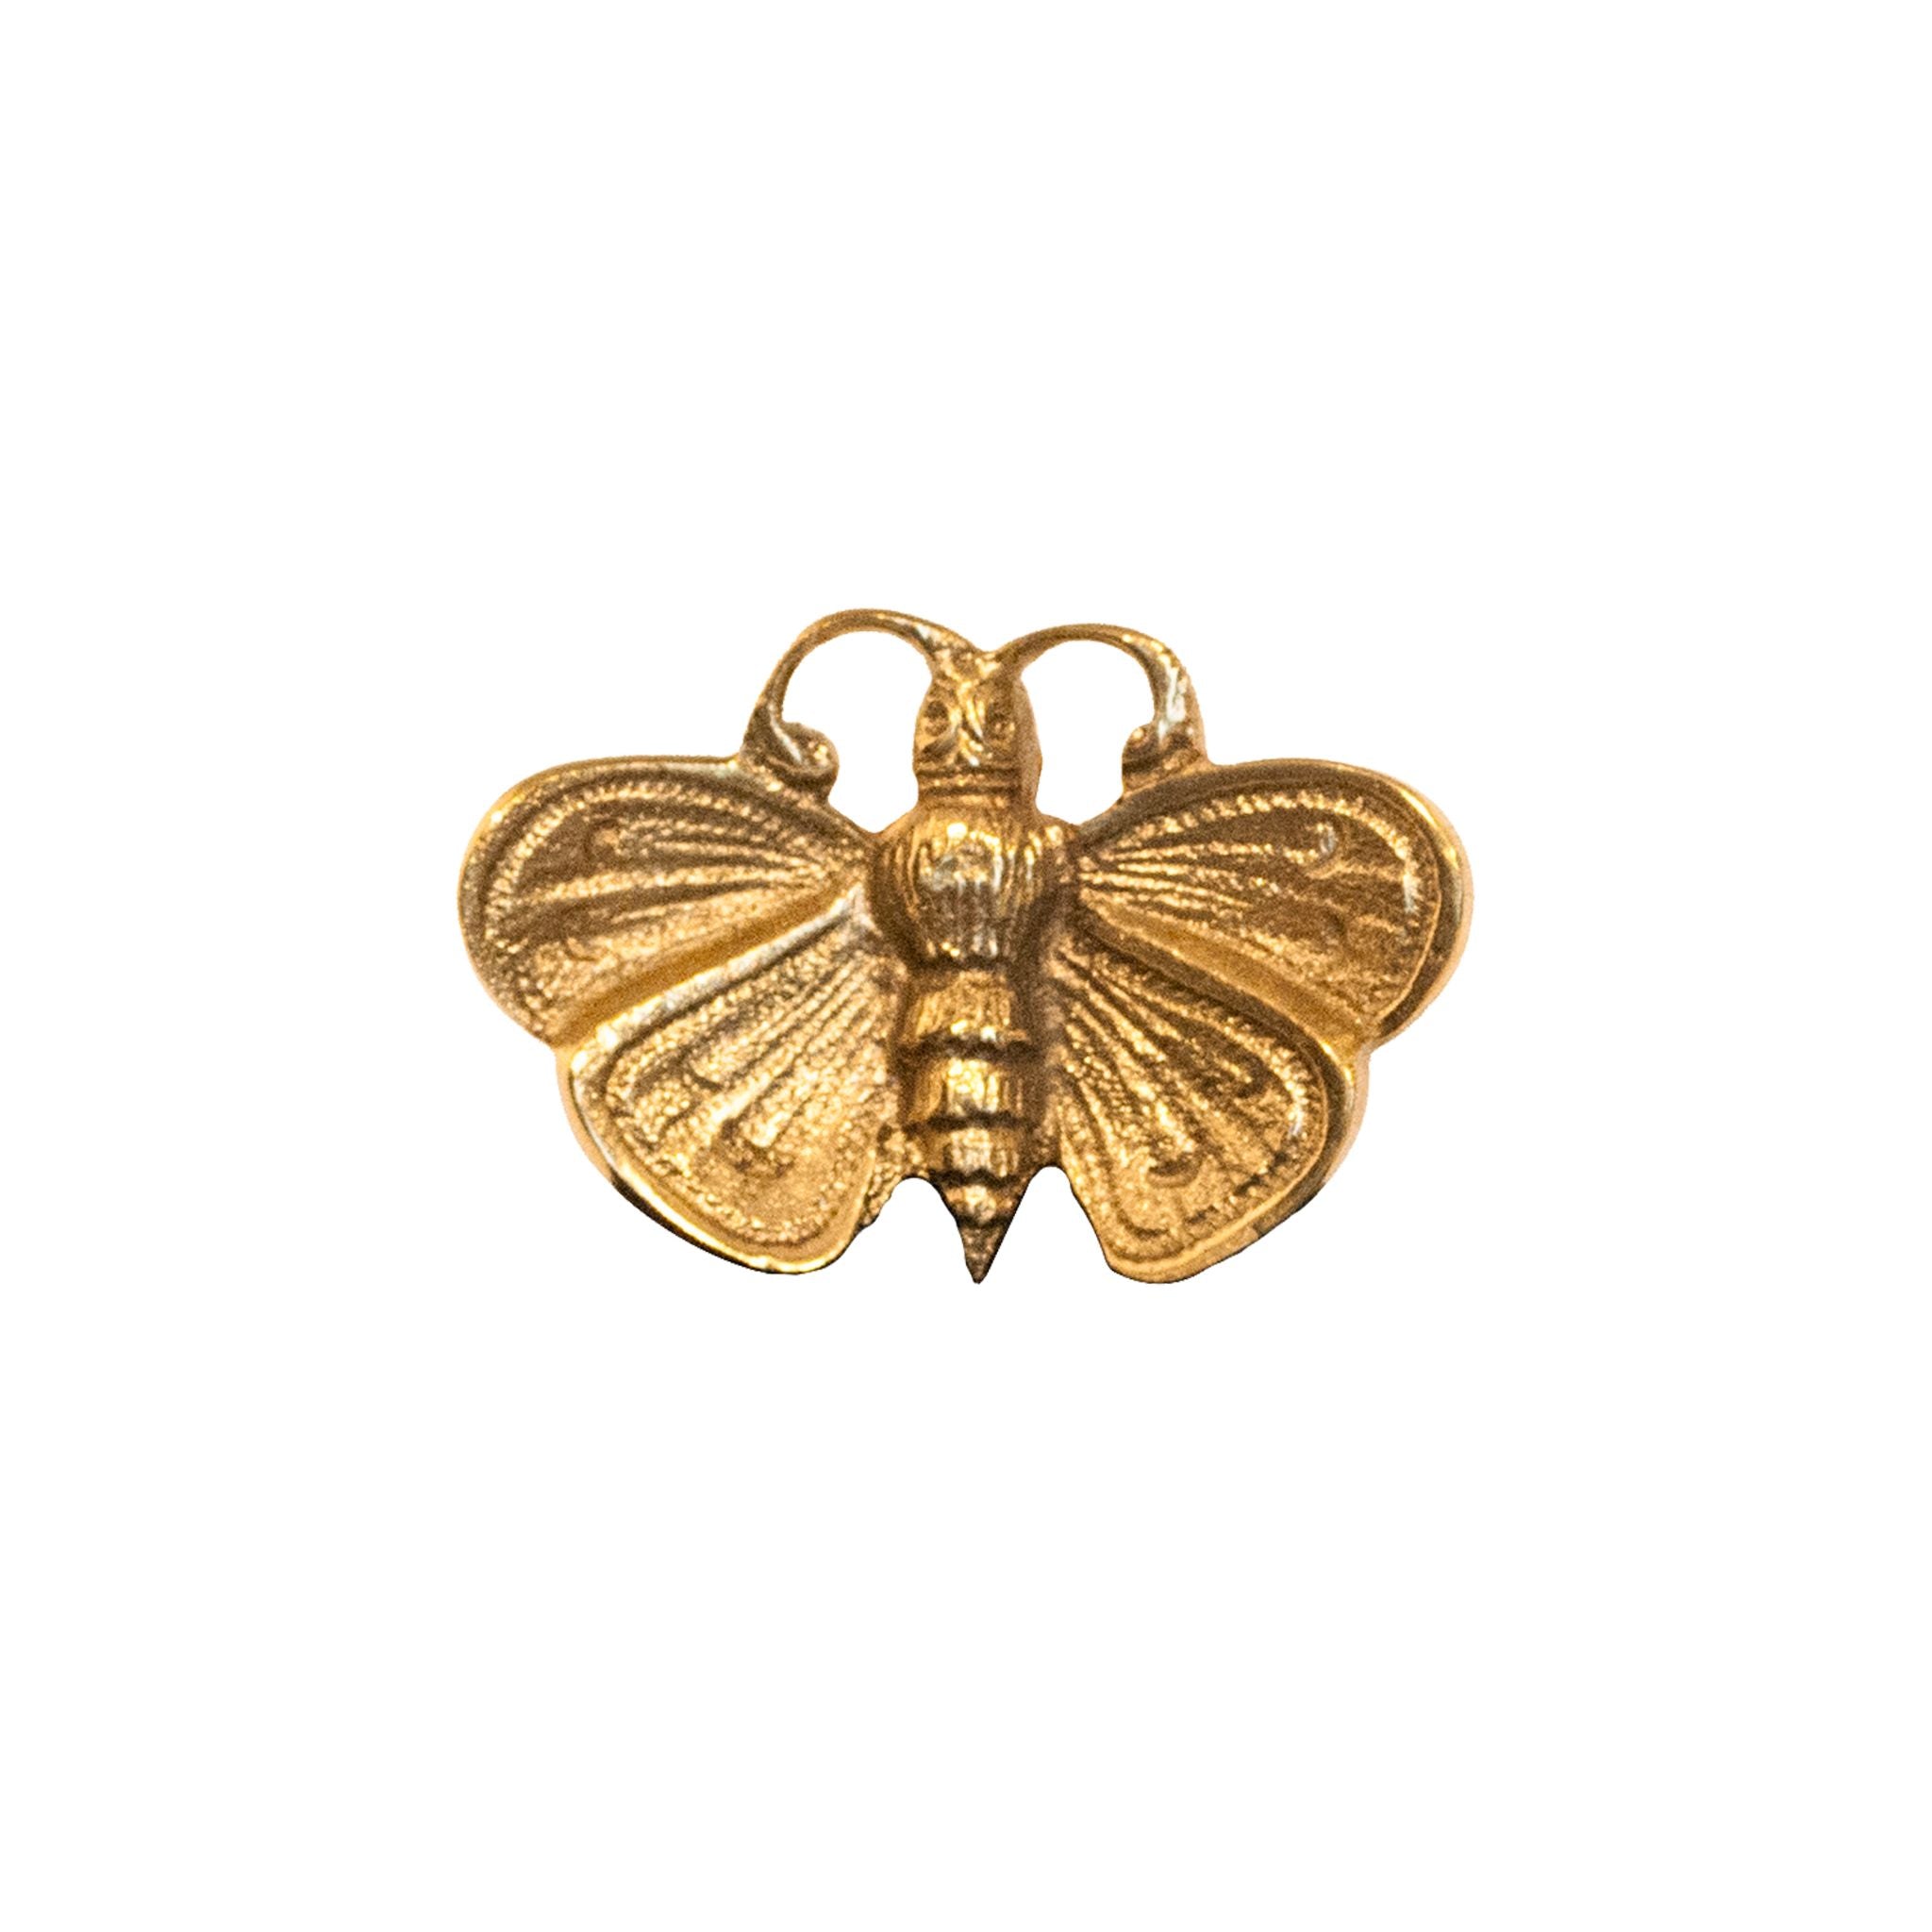 An image of a medium-sized brass butterfly-shaped knob against a neutral background. The knob is intricately designed with detailed butterfly wings, adding a touch of elegance and charm to furniture or drawers.